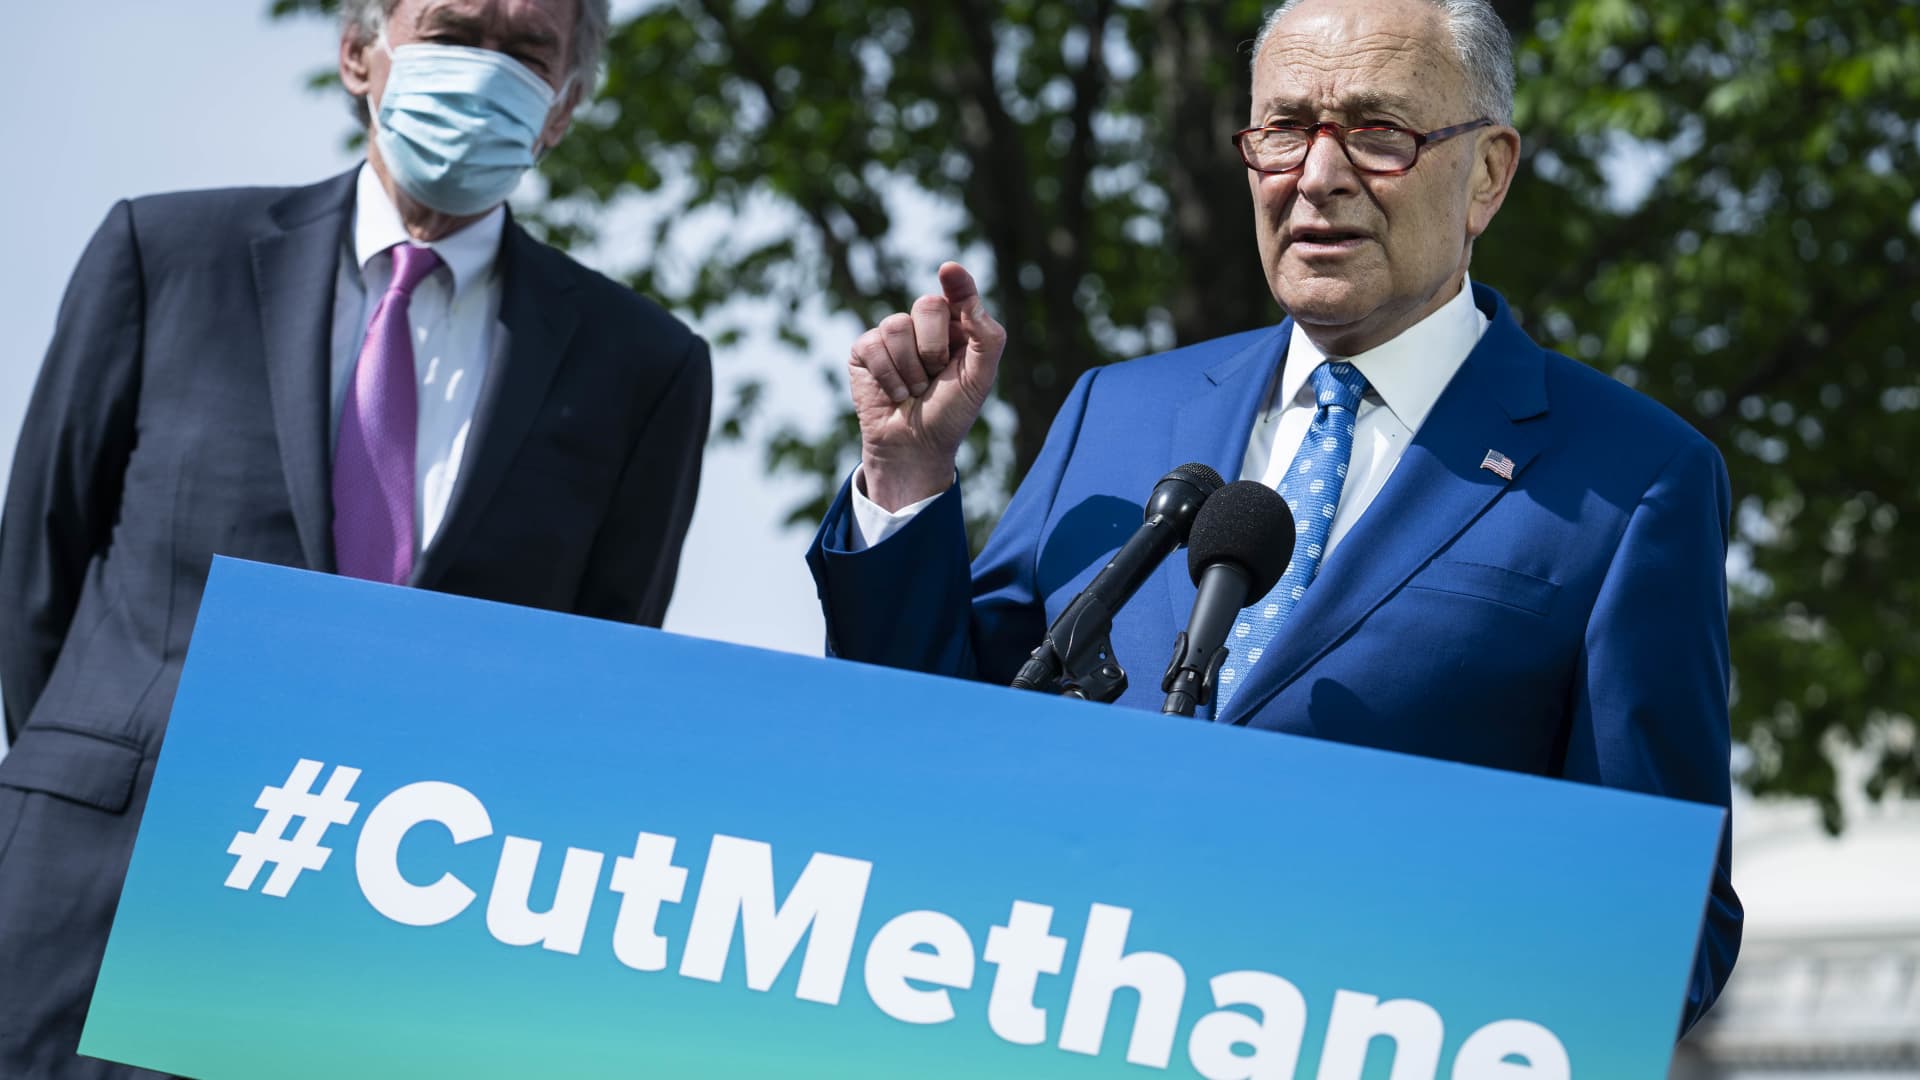 U.S. Senate Majority Leader Sen. Chuck Schumer (D-NY) (L) and Senator Ed Markey (D-MA) participate in a news conference about the Senate vote on methane regulation outside of the U.S. Capitol on April 28, 2021 in Washington, DC.